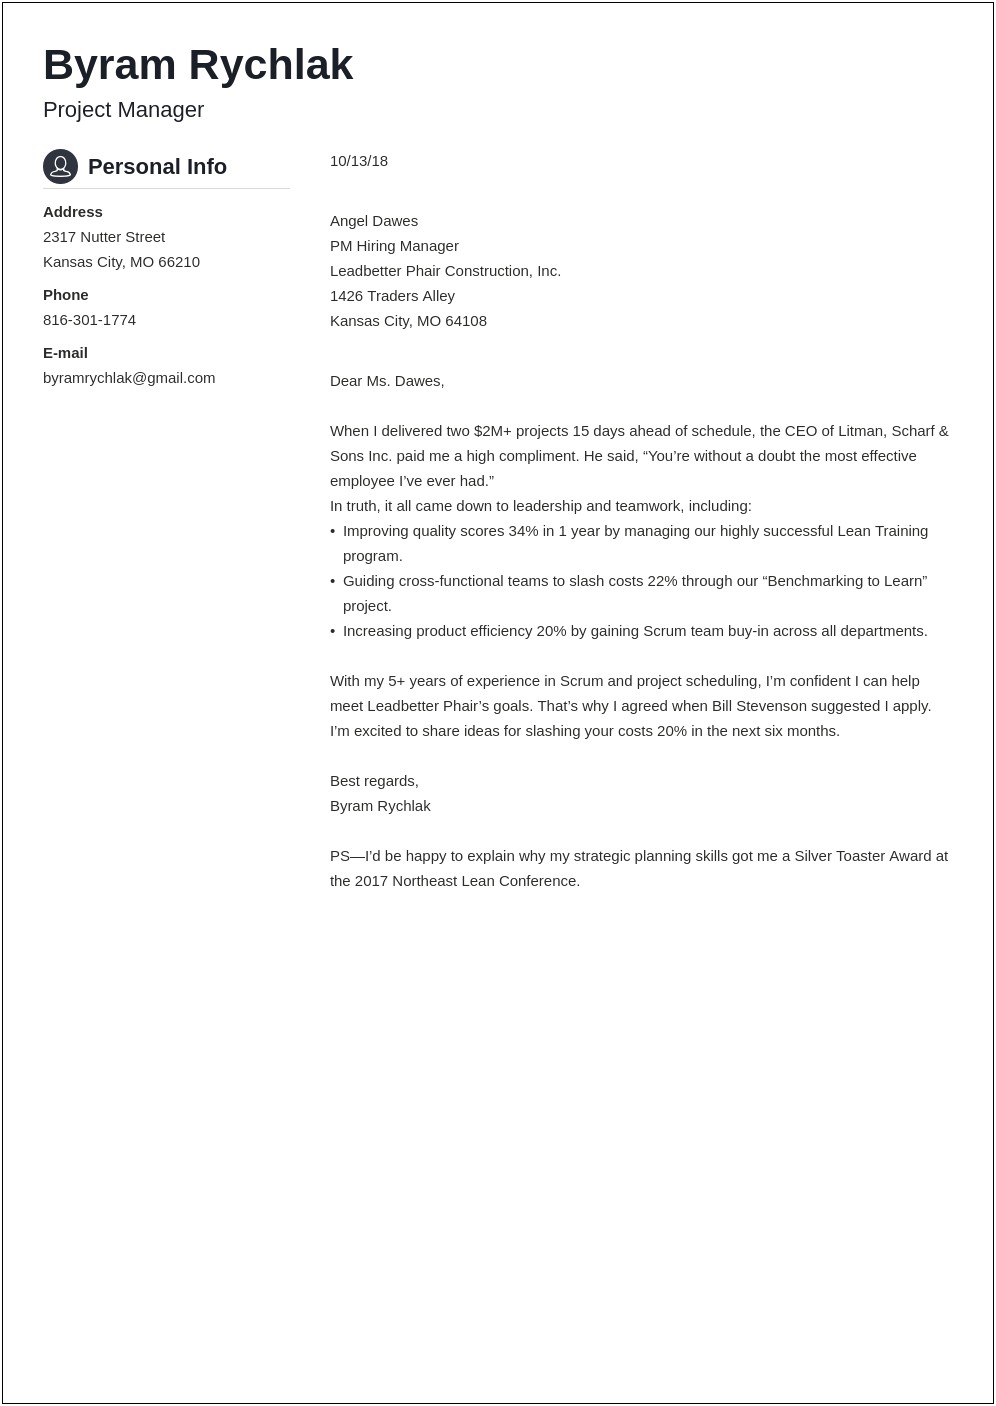 Resume Cover Letter Ending With Name